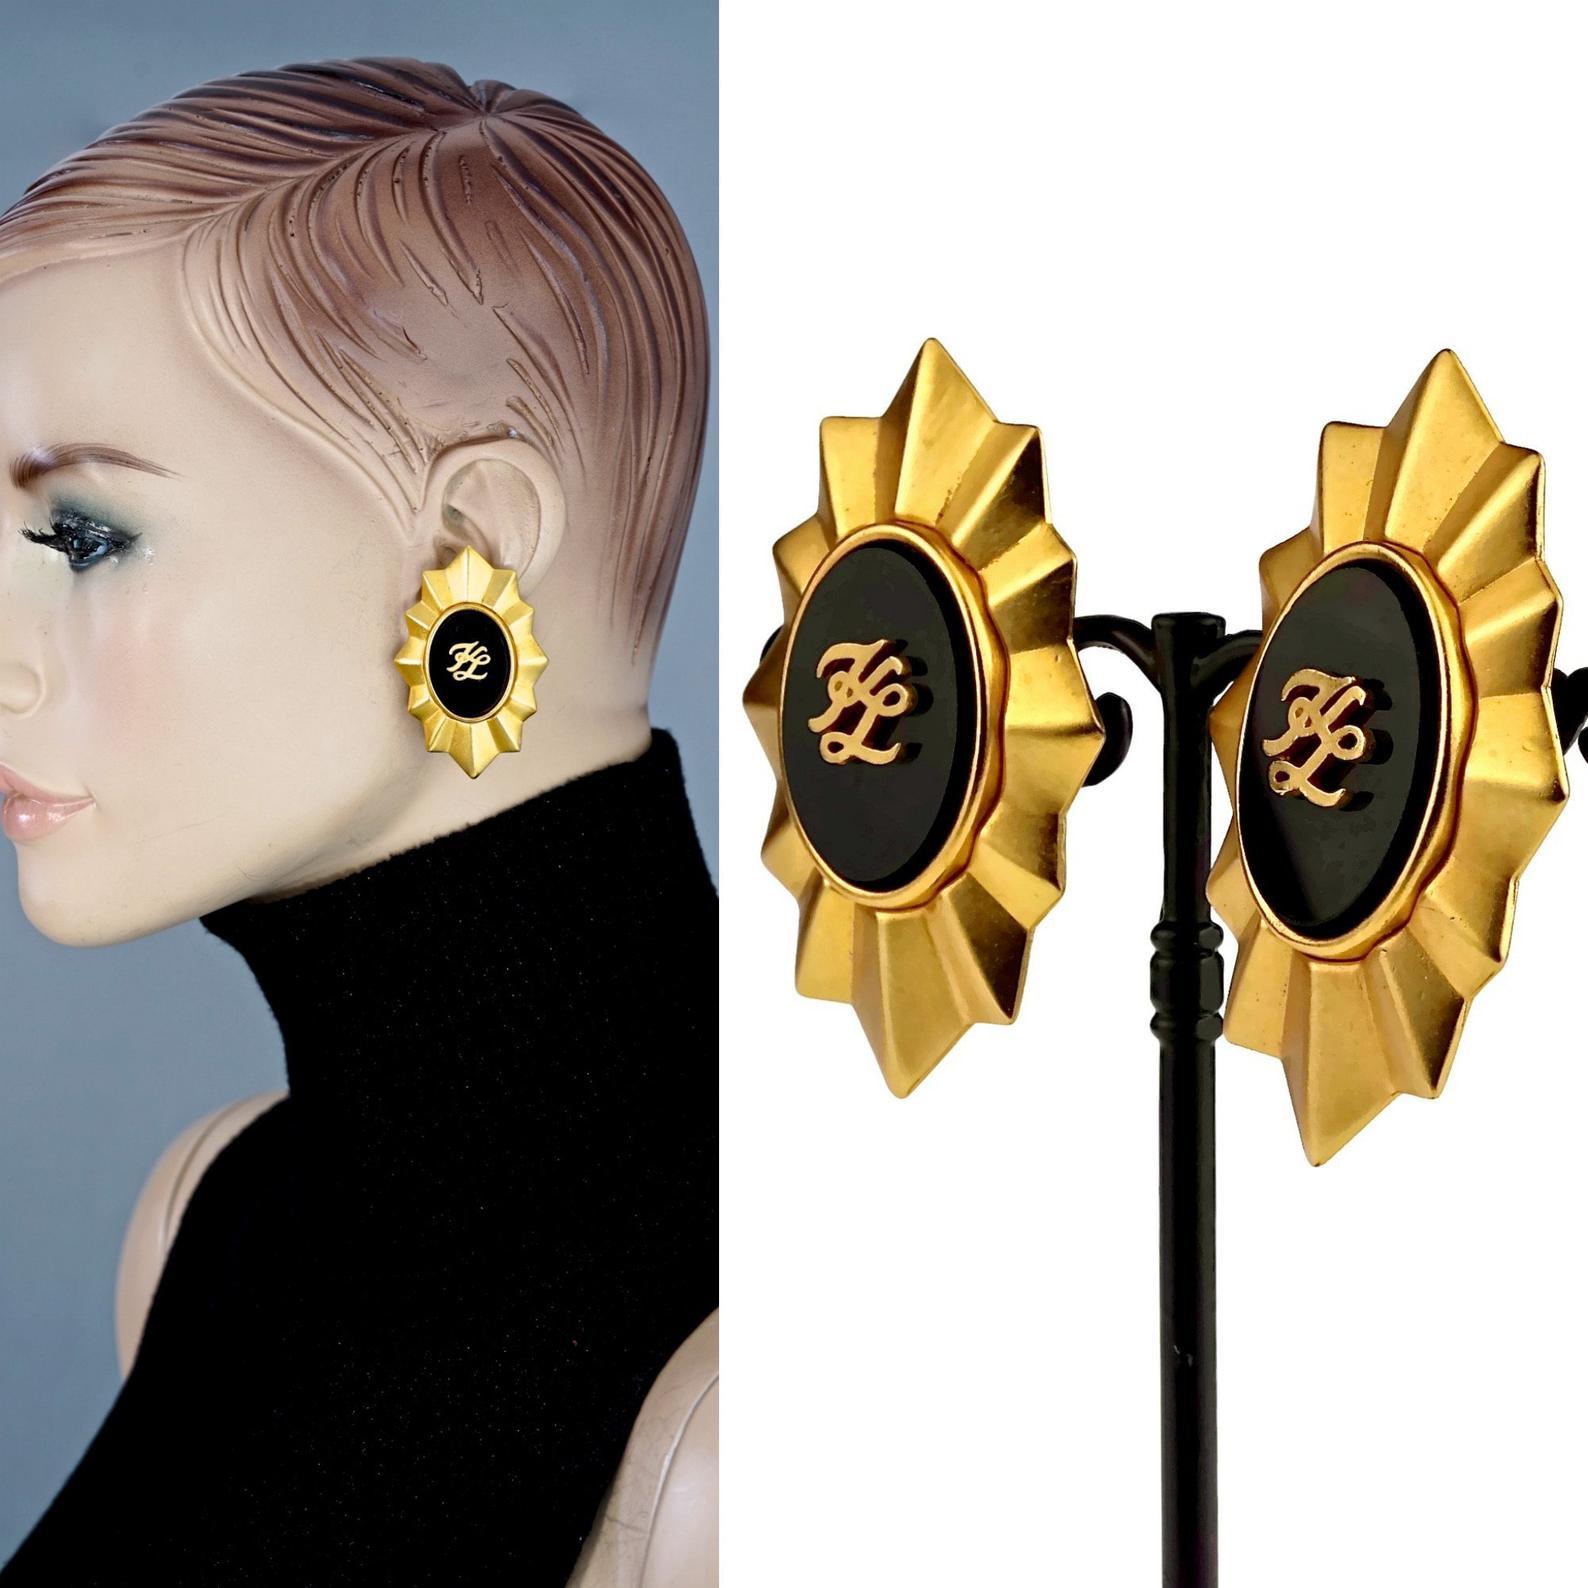 Vintage Karl Lagerfeld KL Logo Sun Earrings

Measurements:
Height: 2.12 inches (5.4 cm)
Width: 1.33 inches (3.4 cm)
Weight per Earring: 21 grams

Features:
- 100% Authentic KARL LAGERFELD.
- Sun motif earrings with embossed KL initials on a black